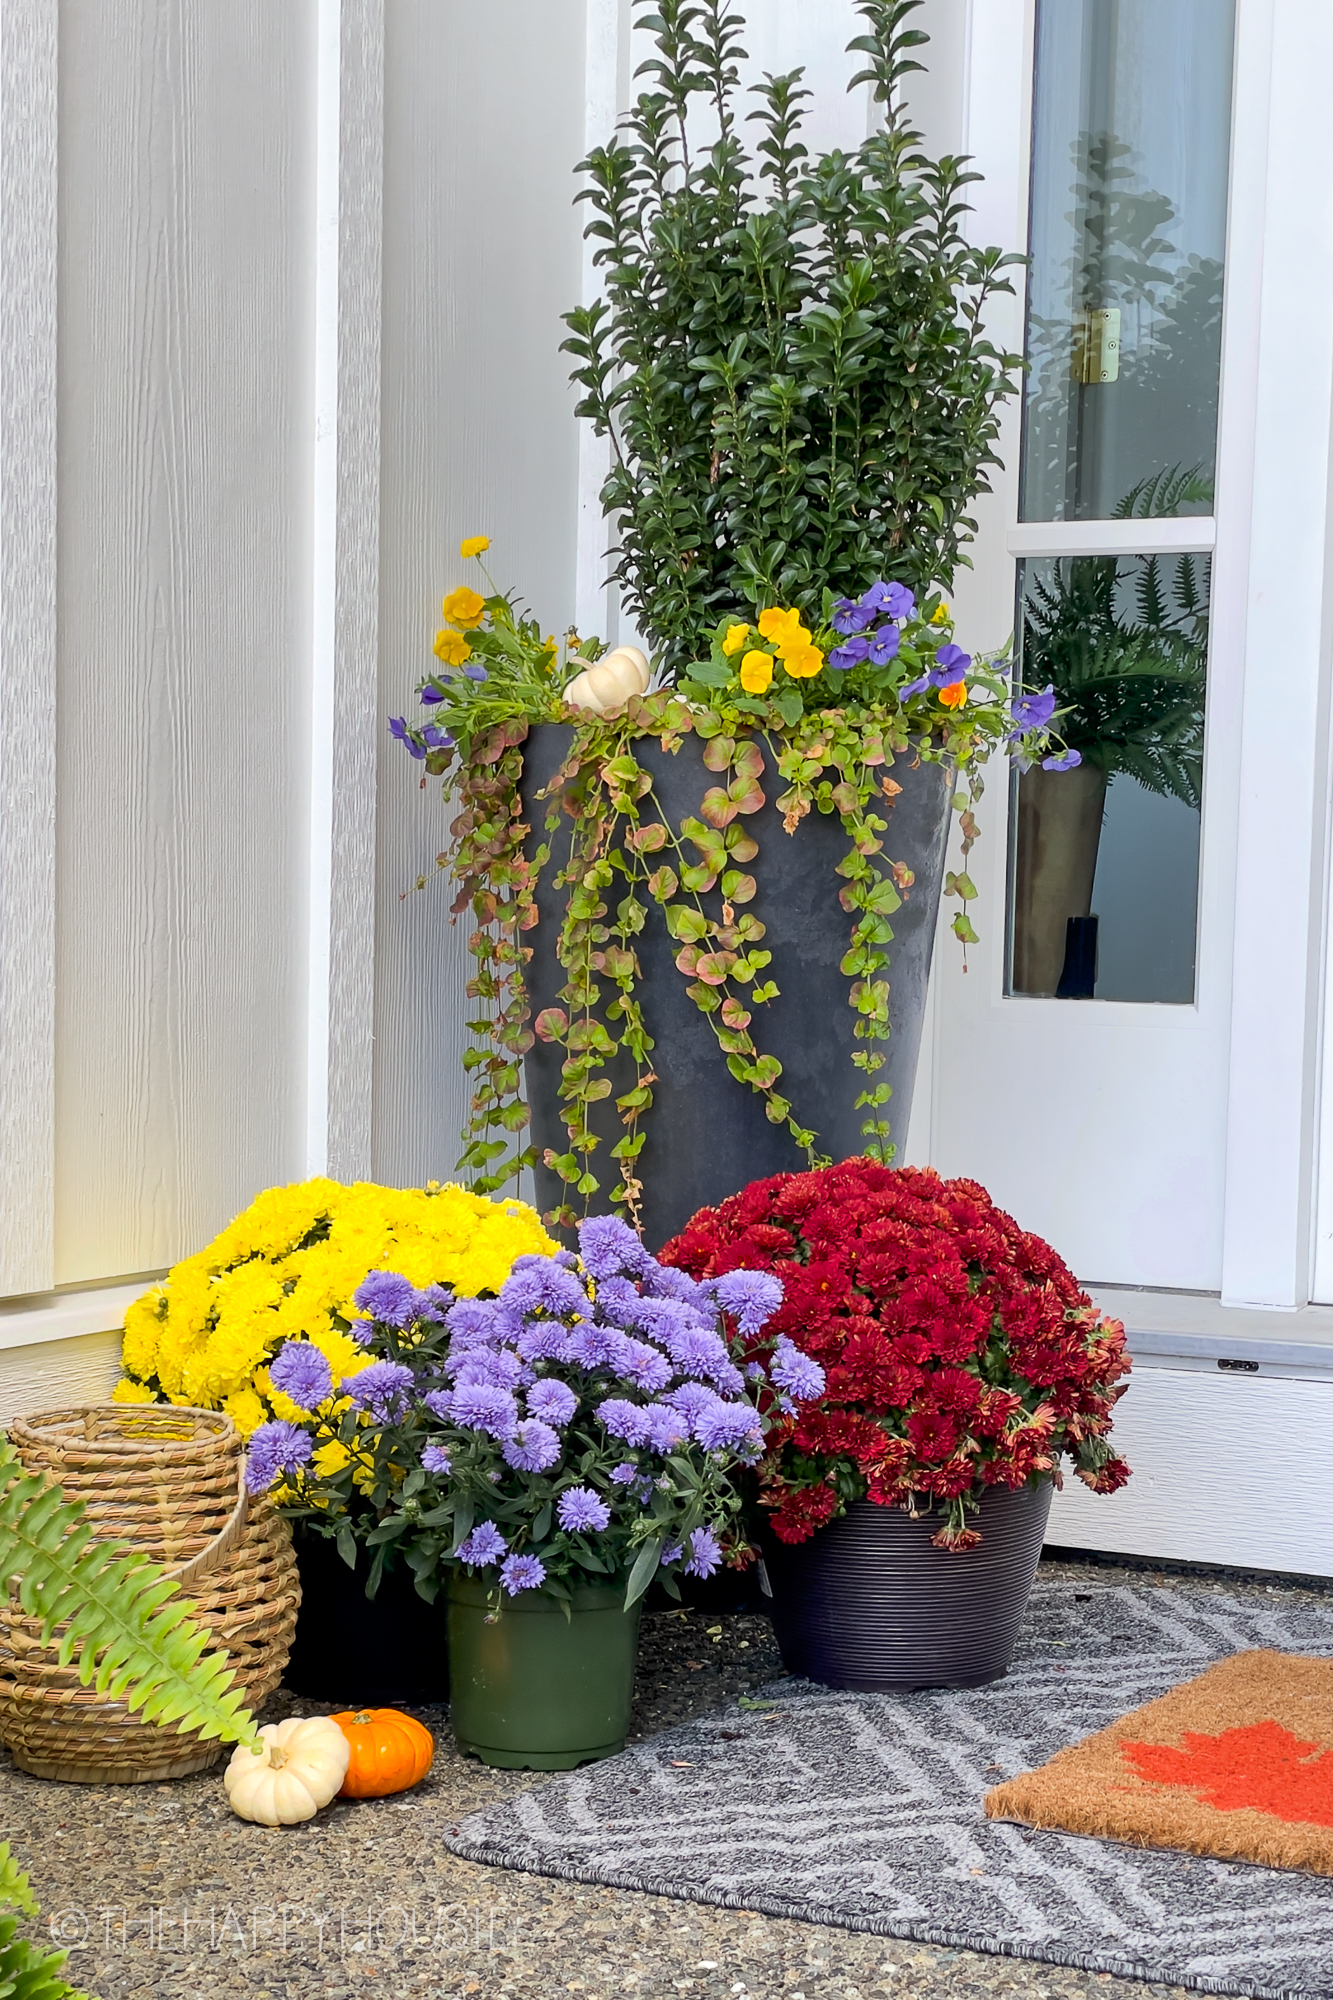 A container garden is by the front door.